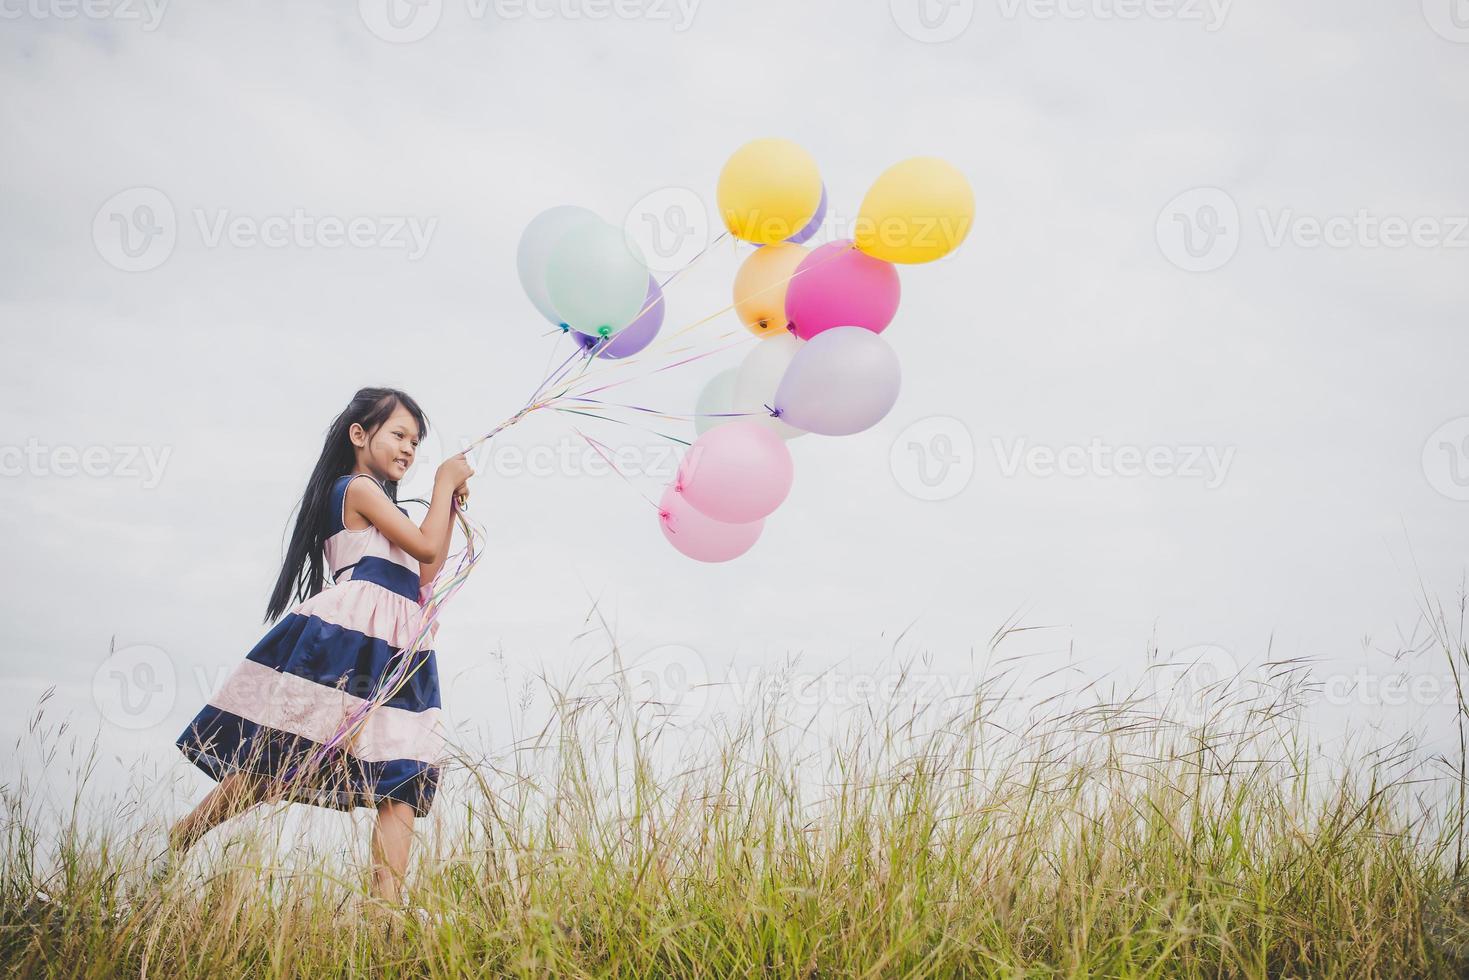 Little girl playing with balloons on meadows field photo